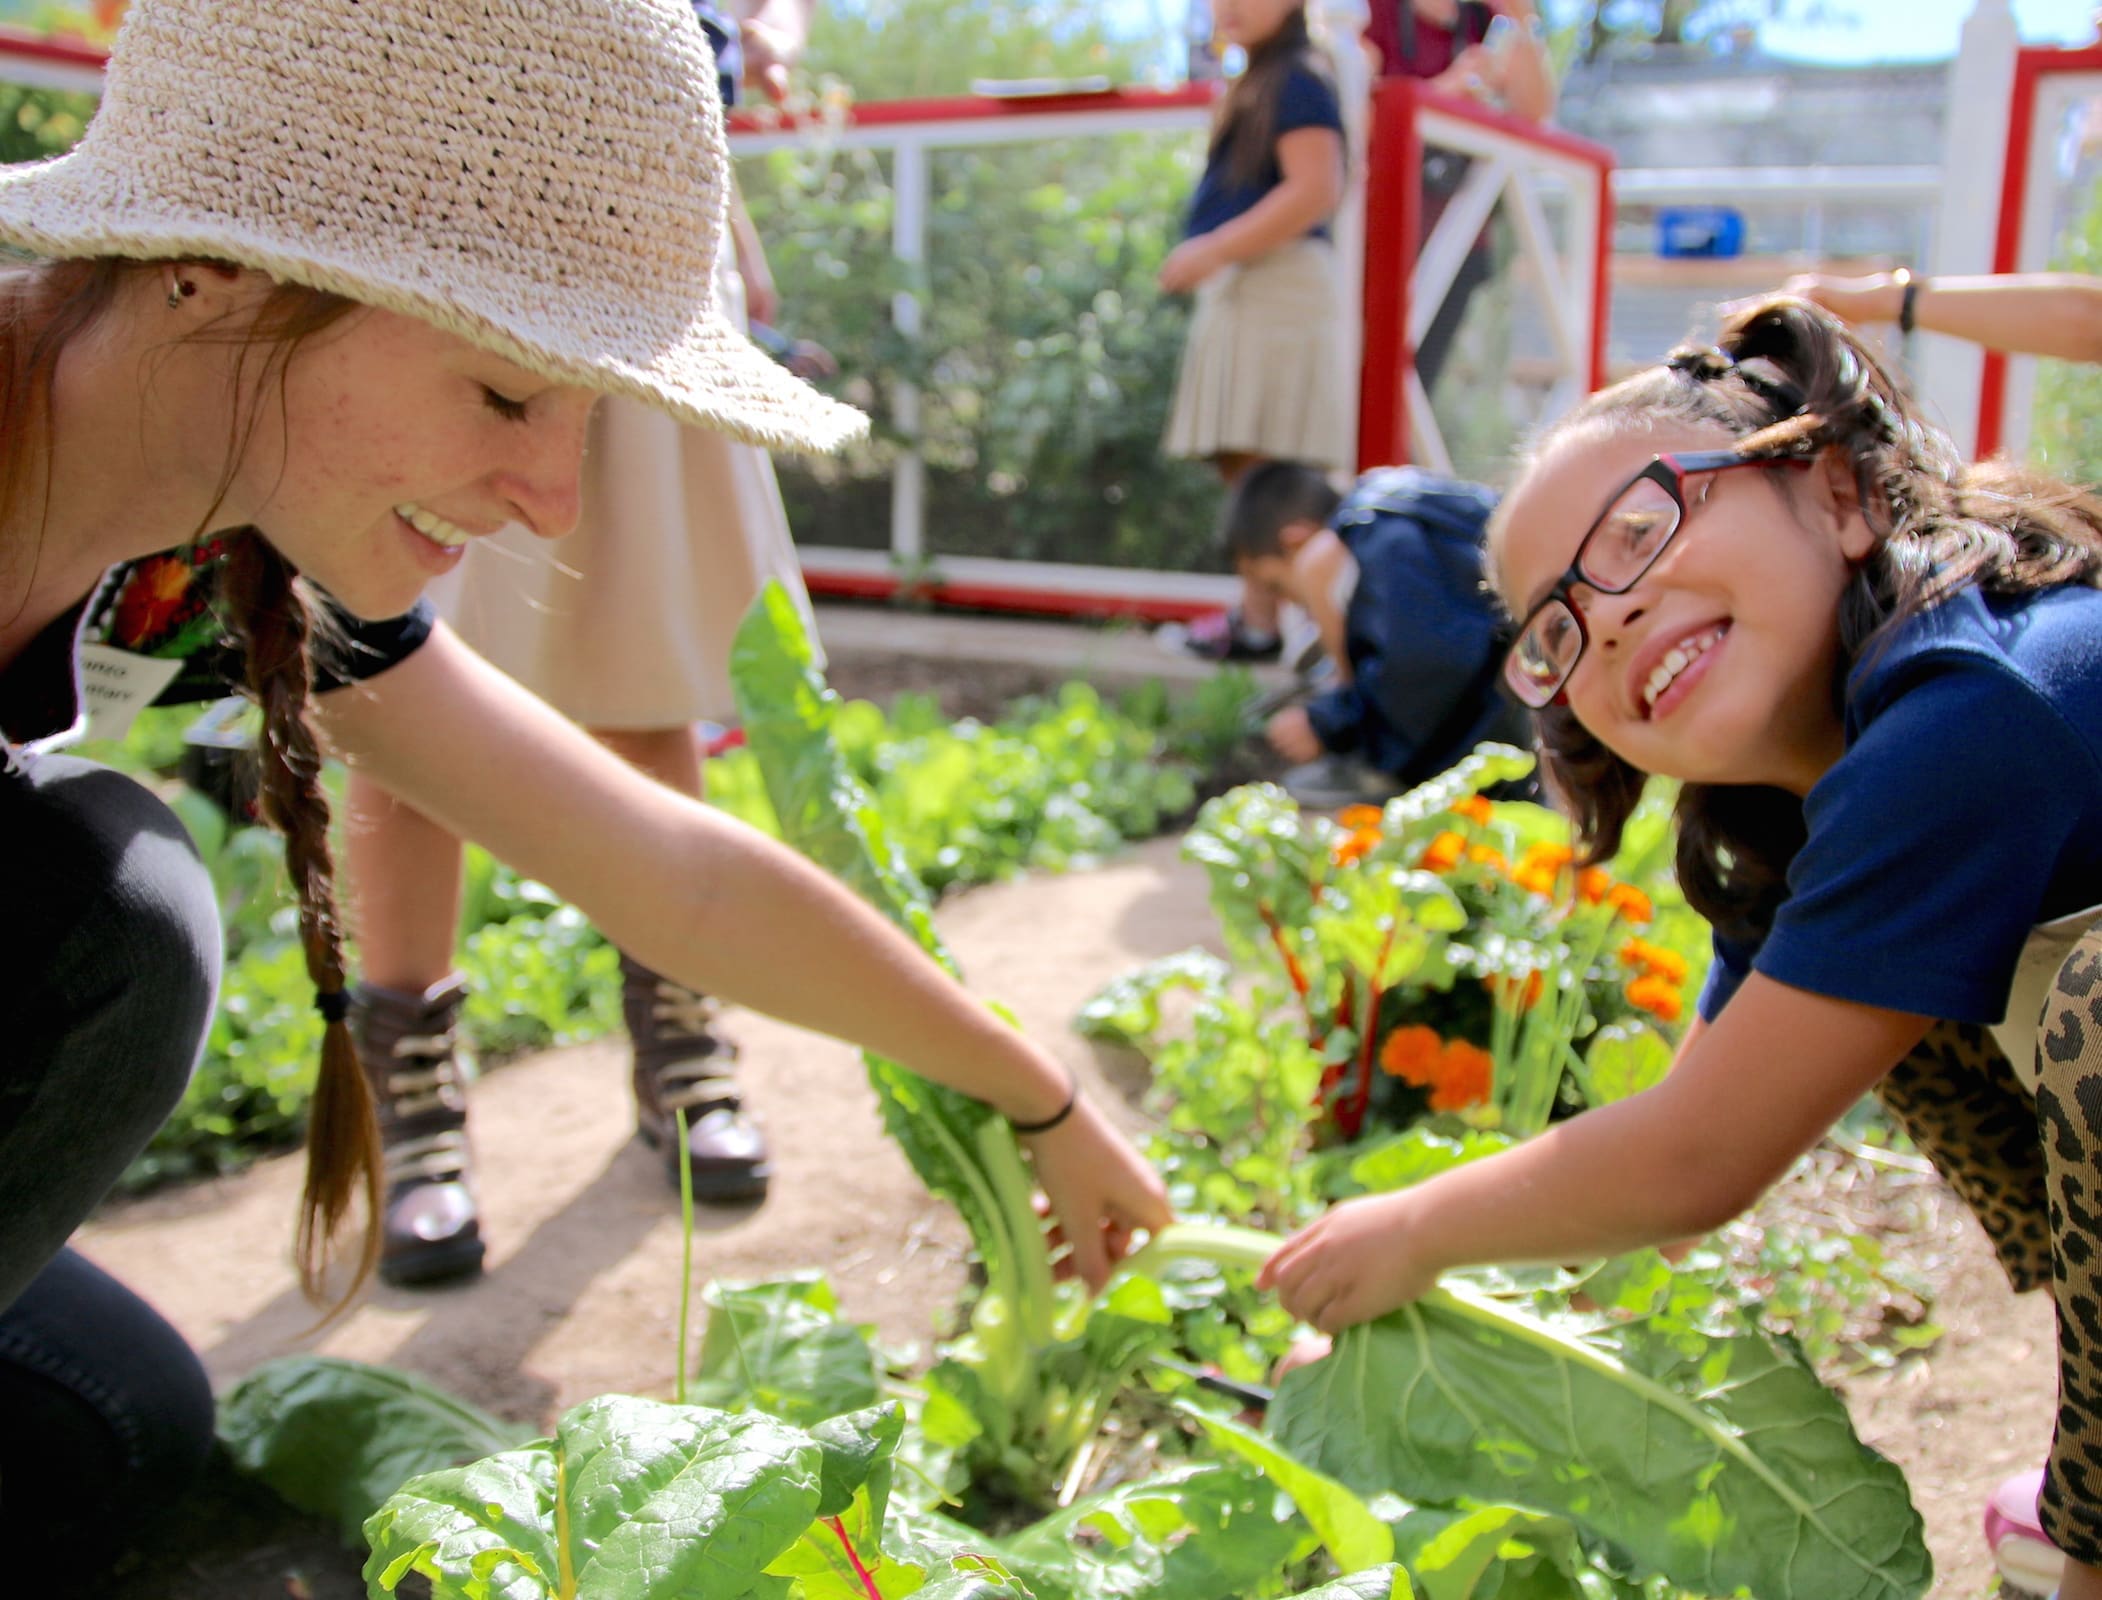 Featured image for “Wilmington elementary wins garden to study nutrition ”